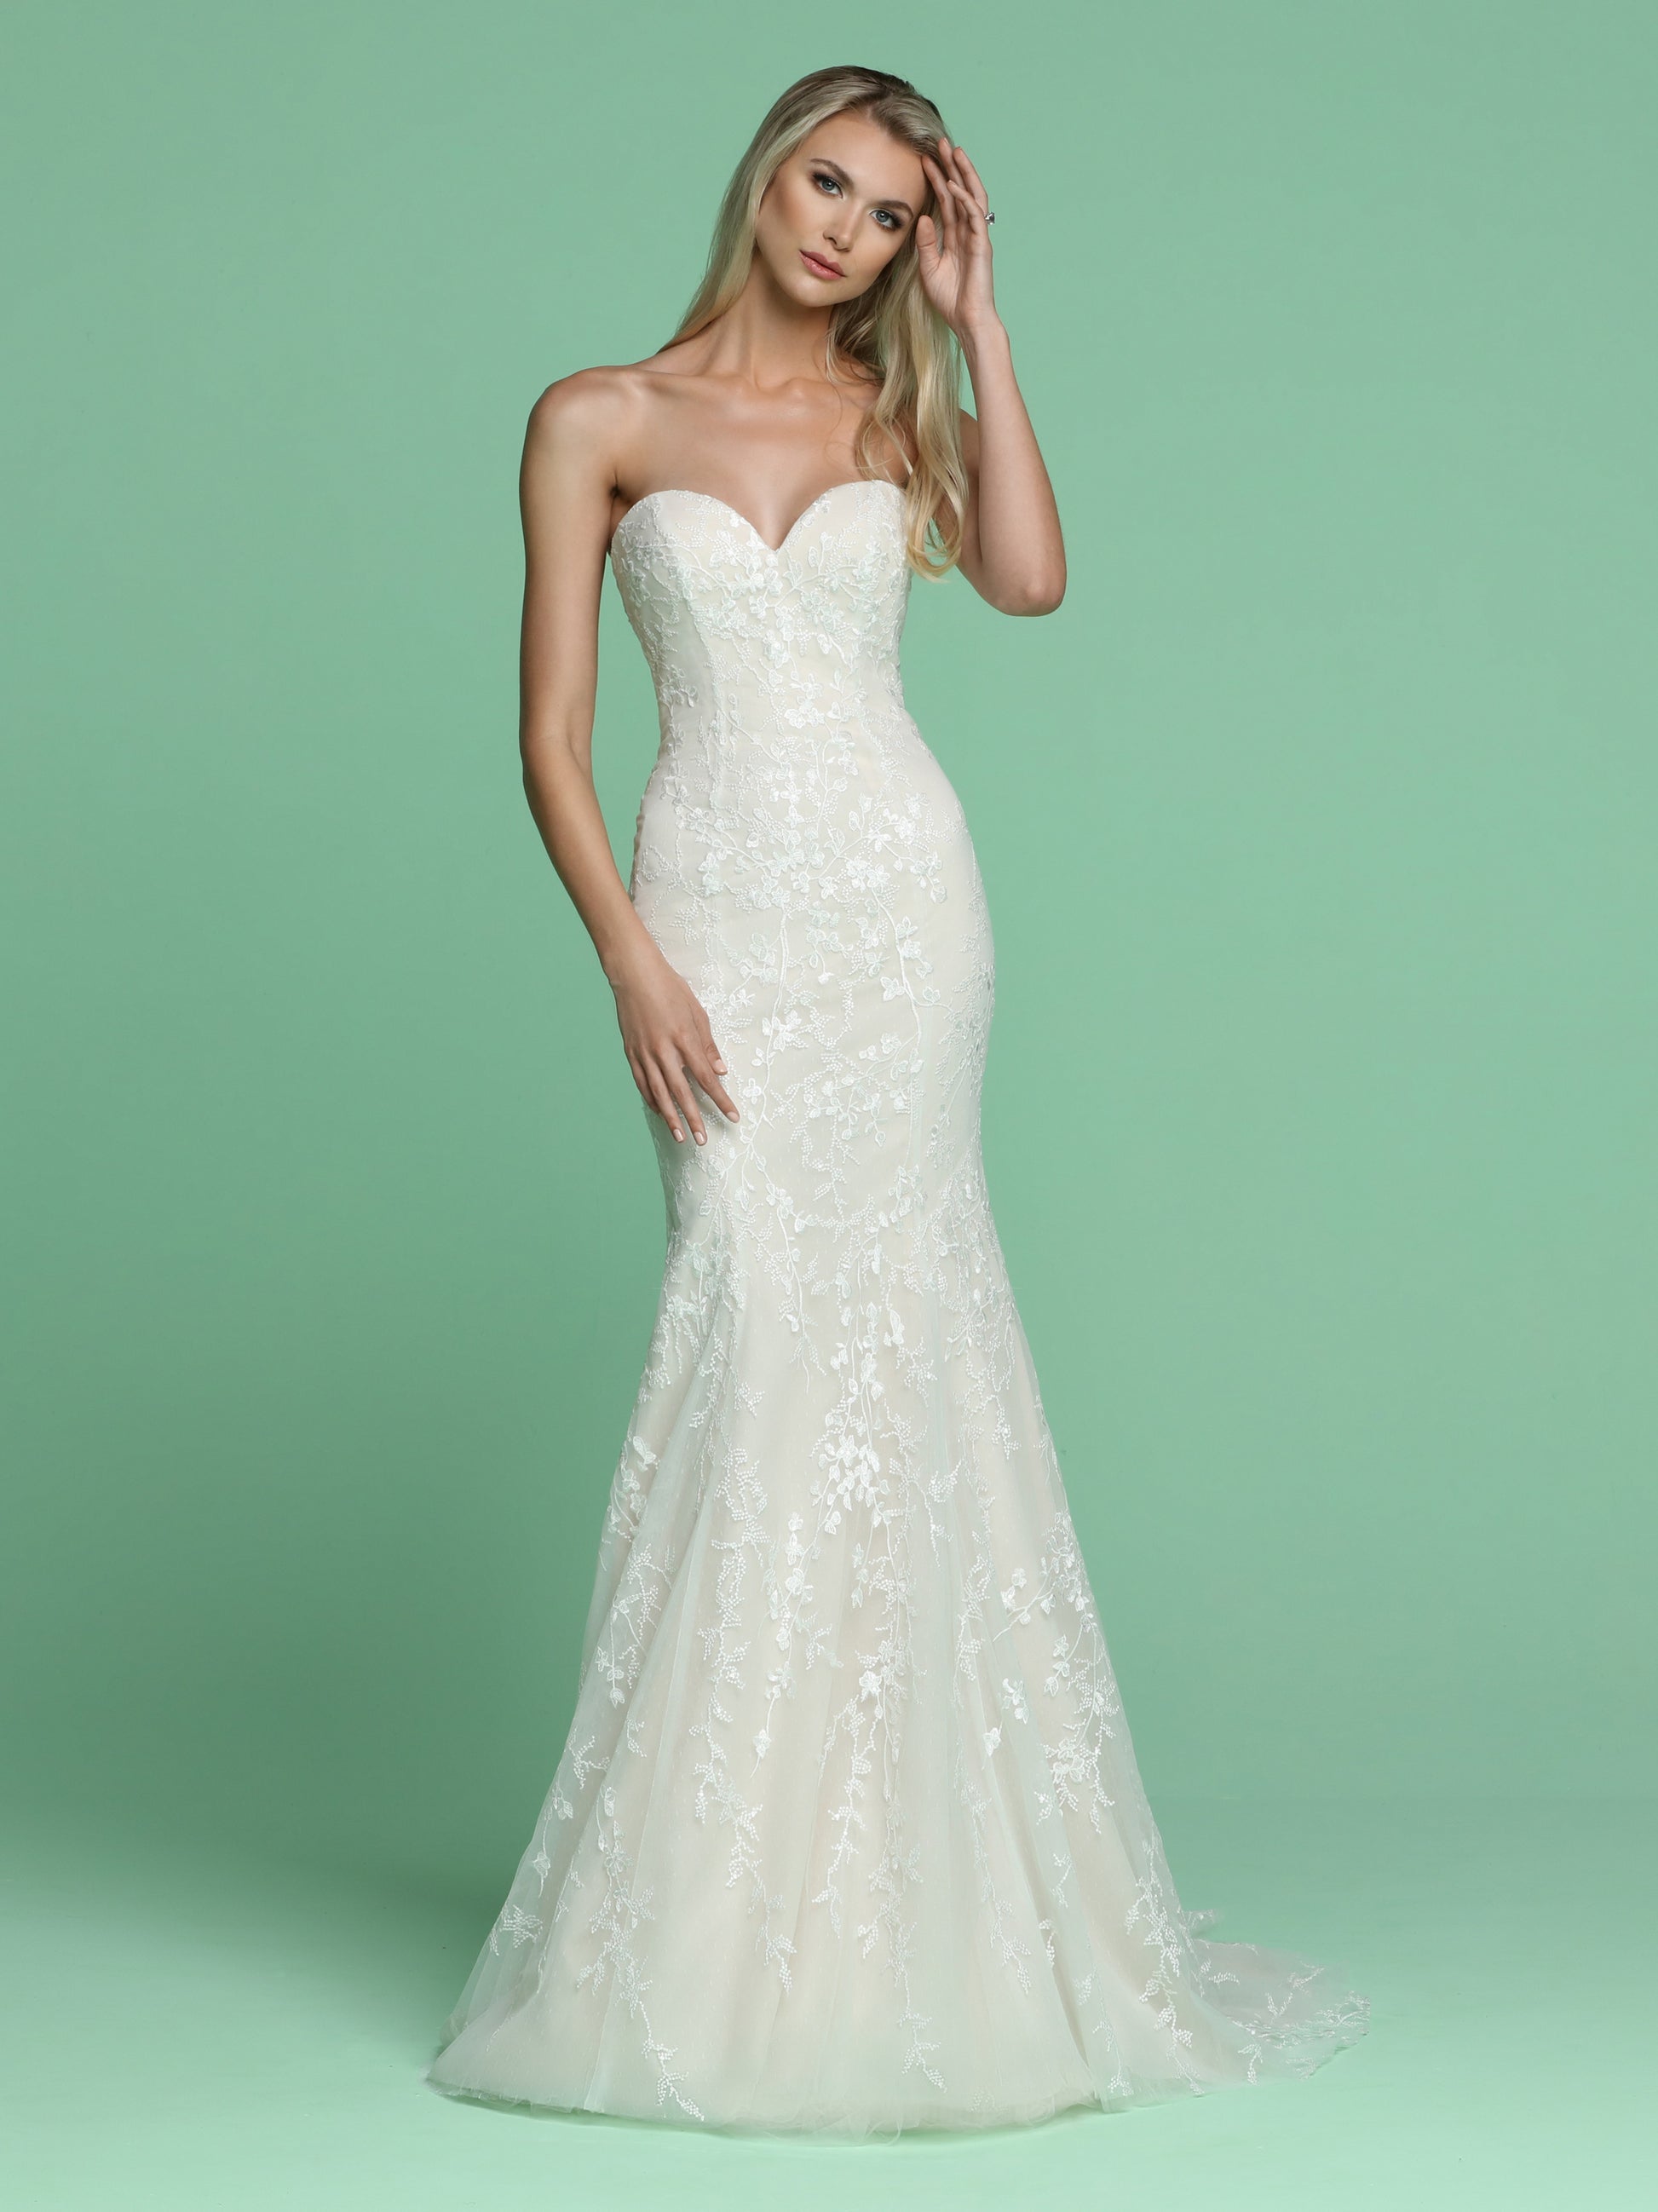 Davinci Bridal 50617 Long stunning Embroidered Tulle Fit & Flare wedding dress. Featuring a strapless sweetheart neckline with a sheer back. Buttons line the back of the gown. flowing into a sweeping train.   Available for 1-2 Week Delivery!!!  Available Sizes: 2,4,6,8,10,12,14,16,18,20  Available Colors: Ivory/Blush, Ivory/Ivory  Available Sizes: 2-30  Available Colors: Ivory/Blush, Ivory/Ivory, White/White